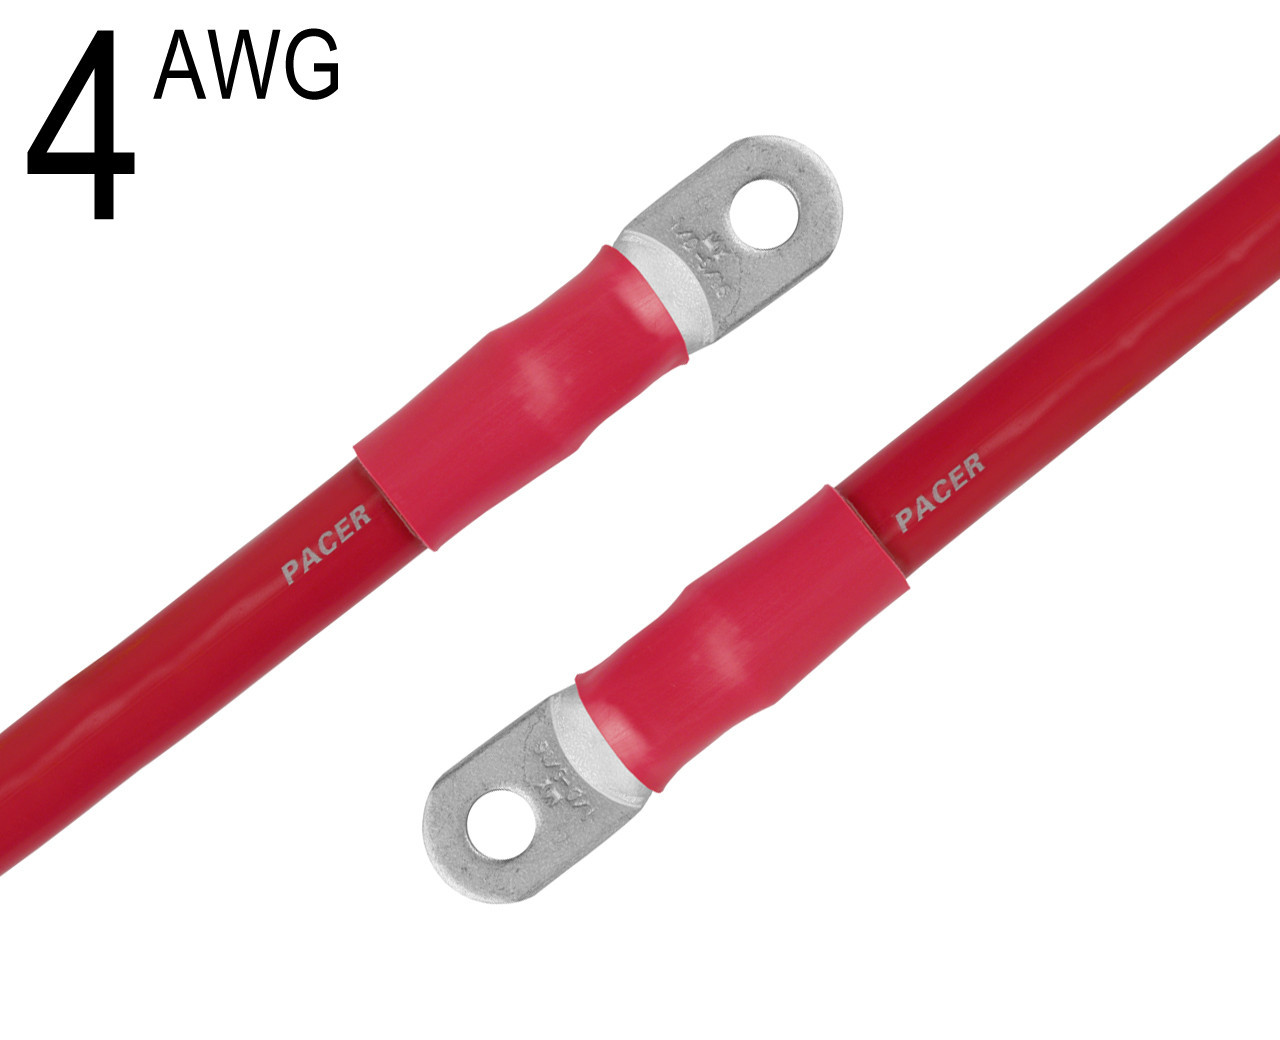 4 AWG, Red, Battery Cables